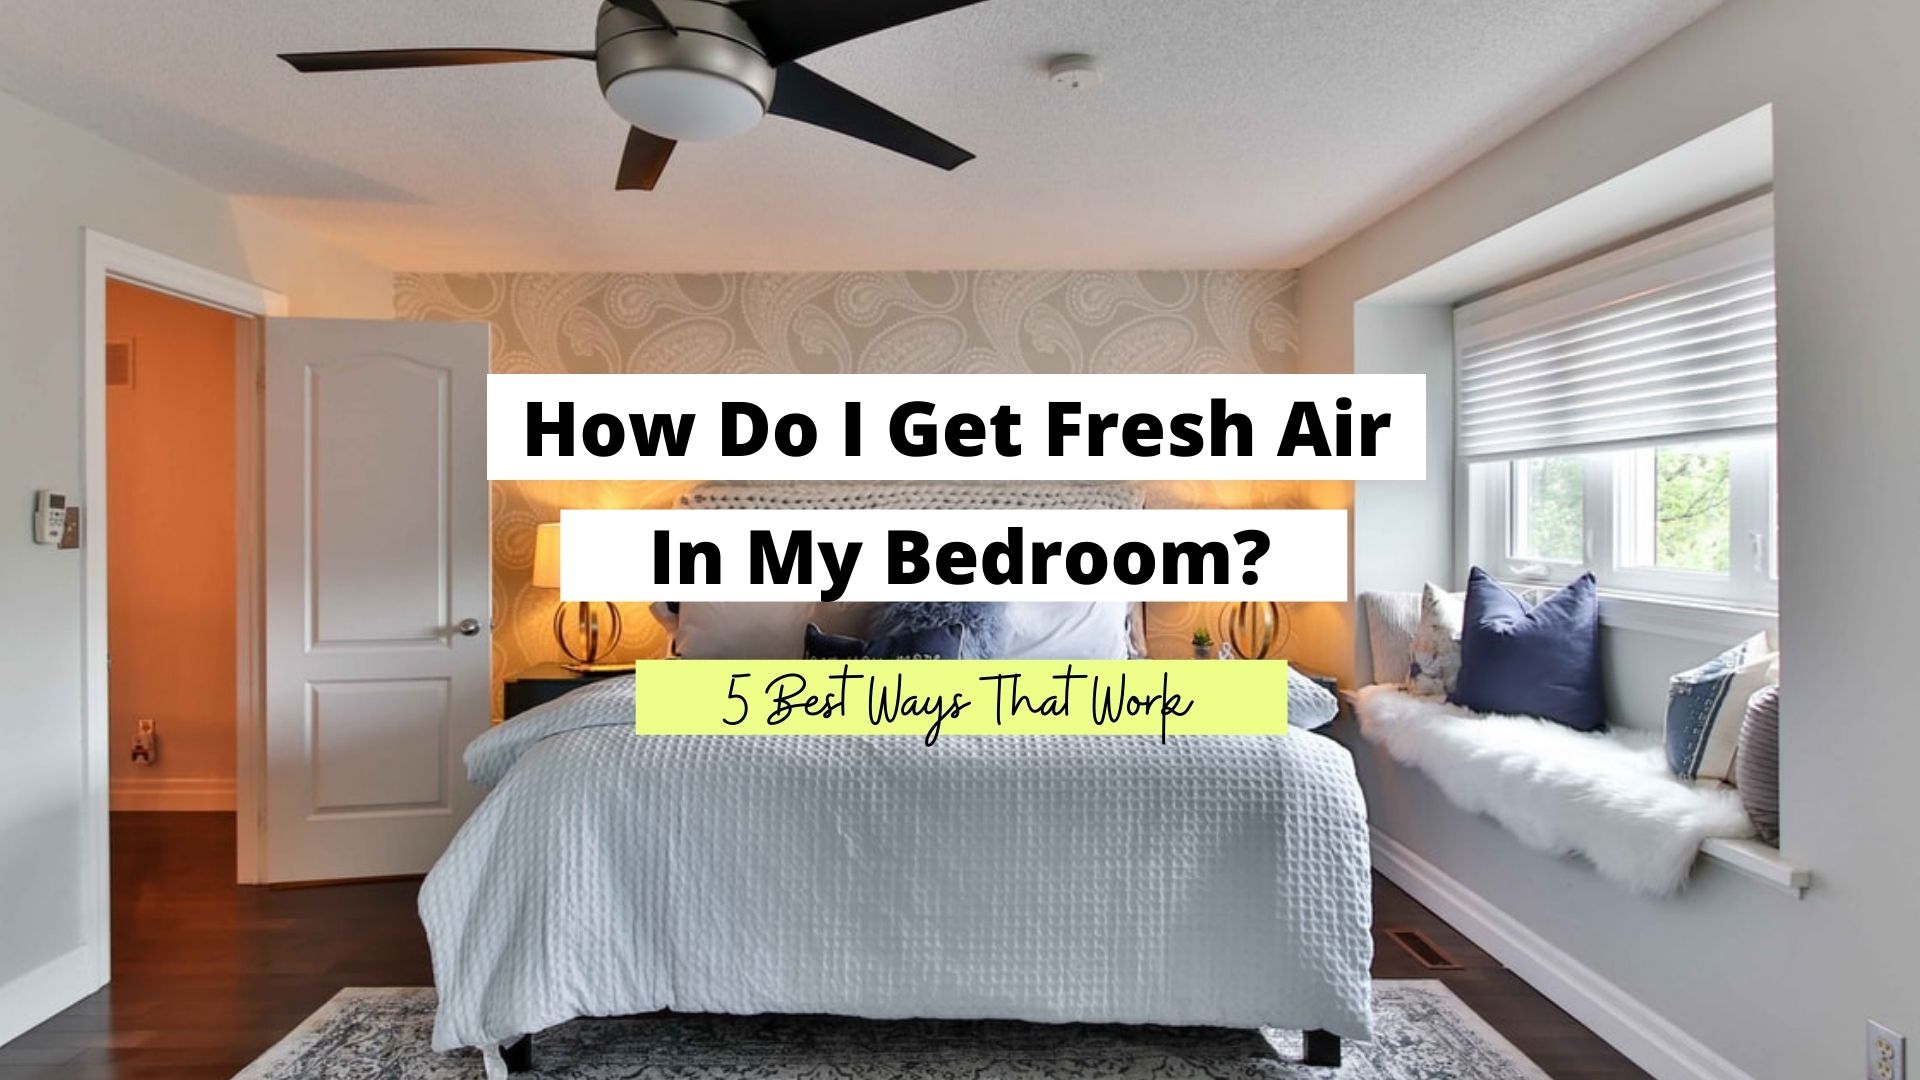 how can I get fresh air into my bedroom